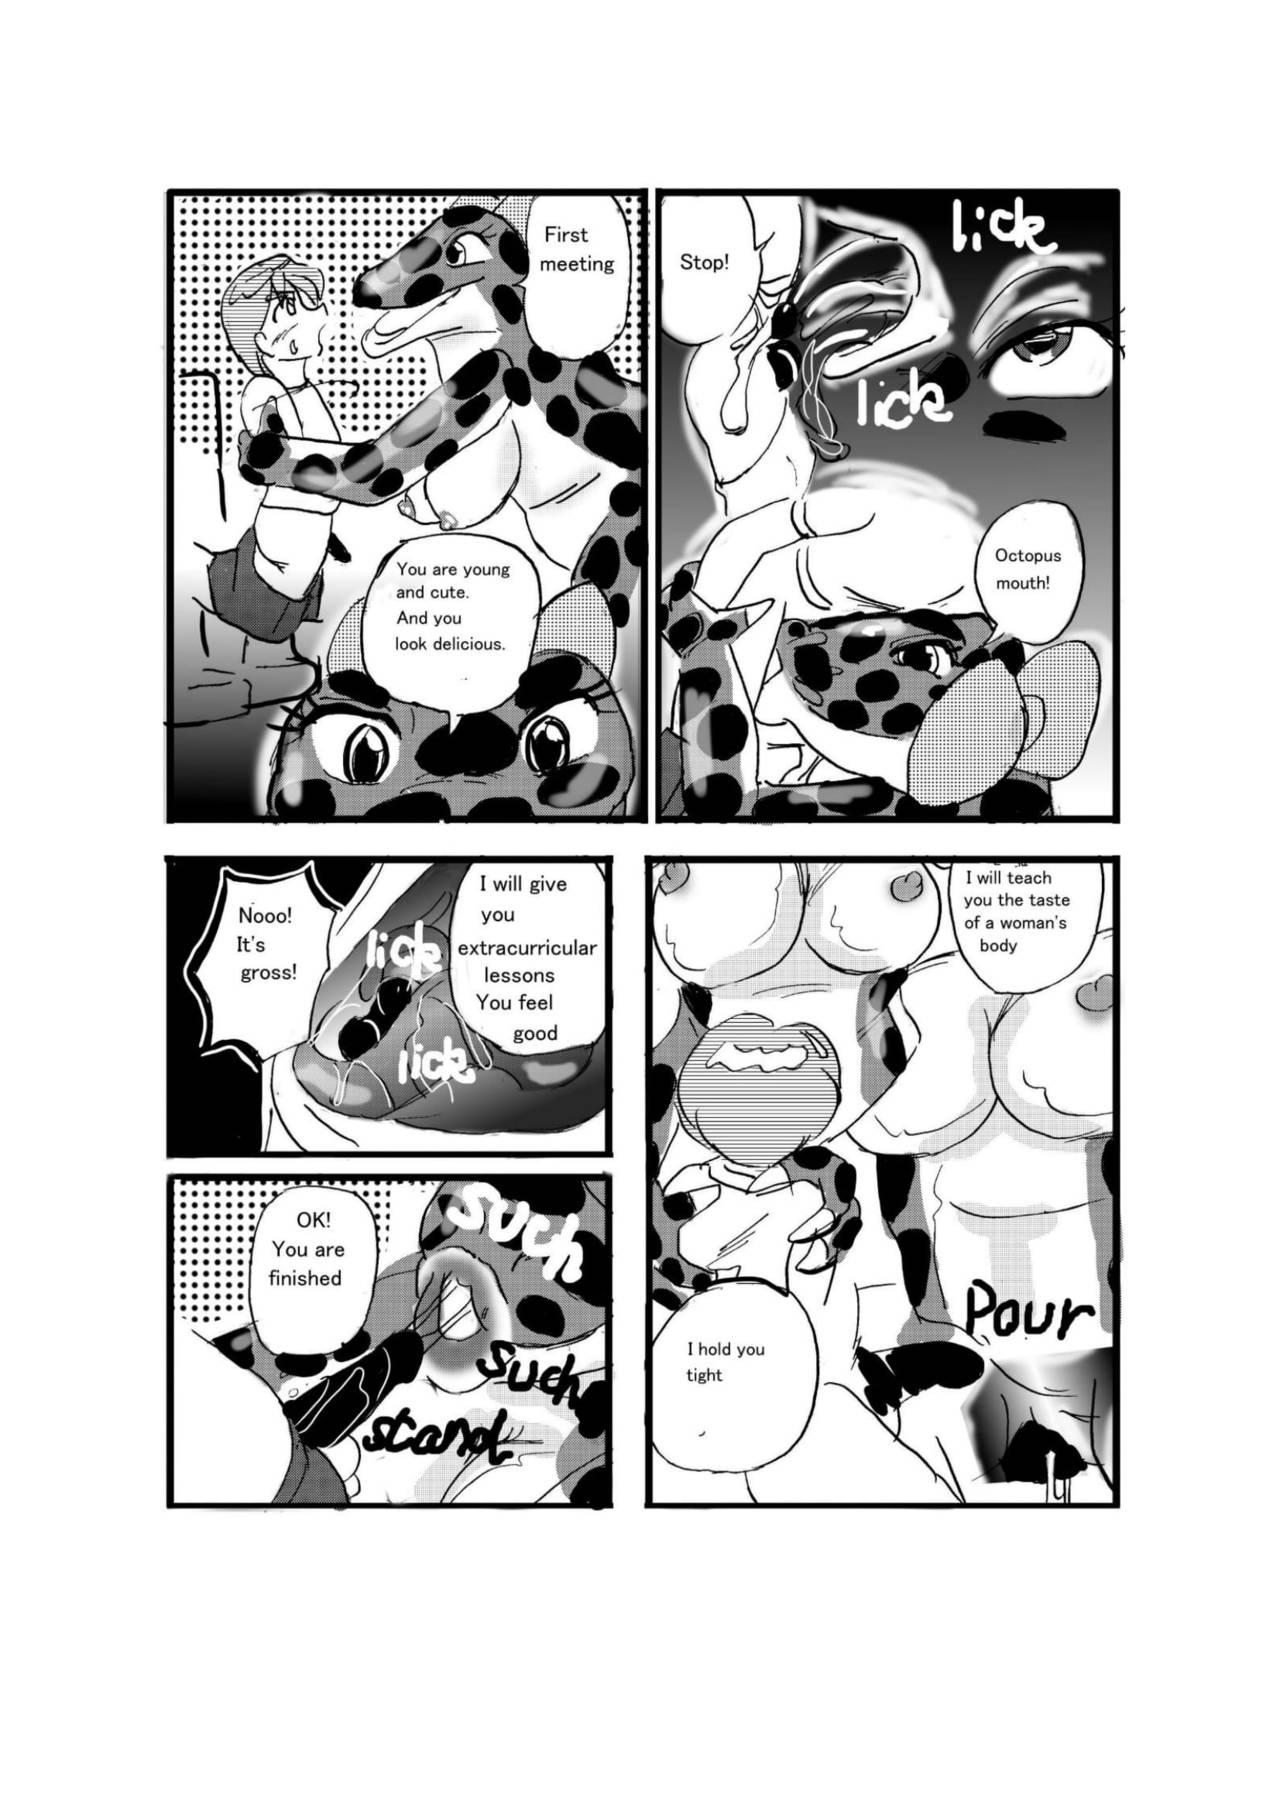 Piercing Swallowed Whole vol.2 Waniko + What's Digestion? - Original Red - Page 4